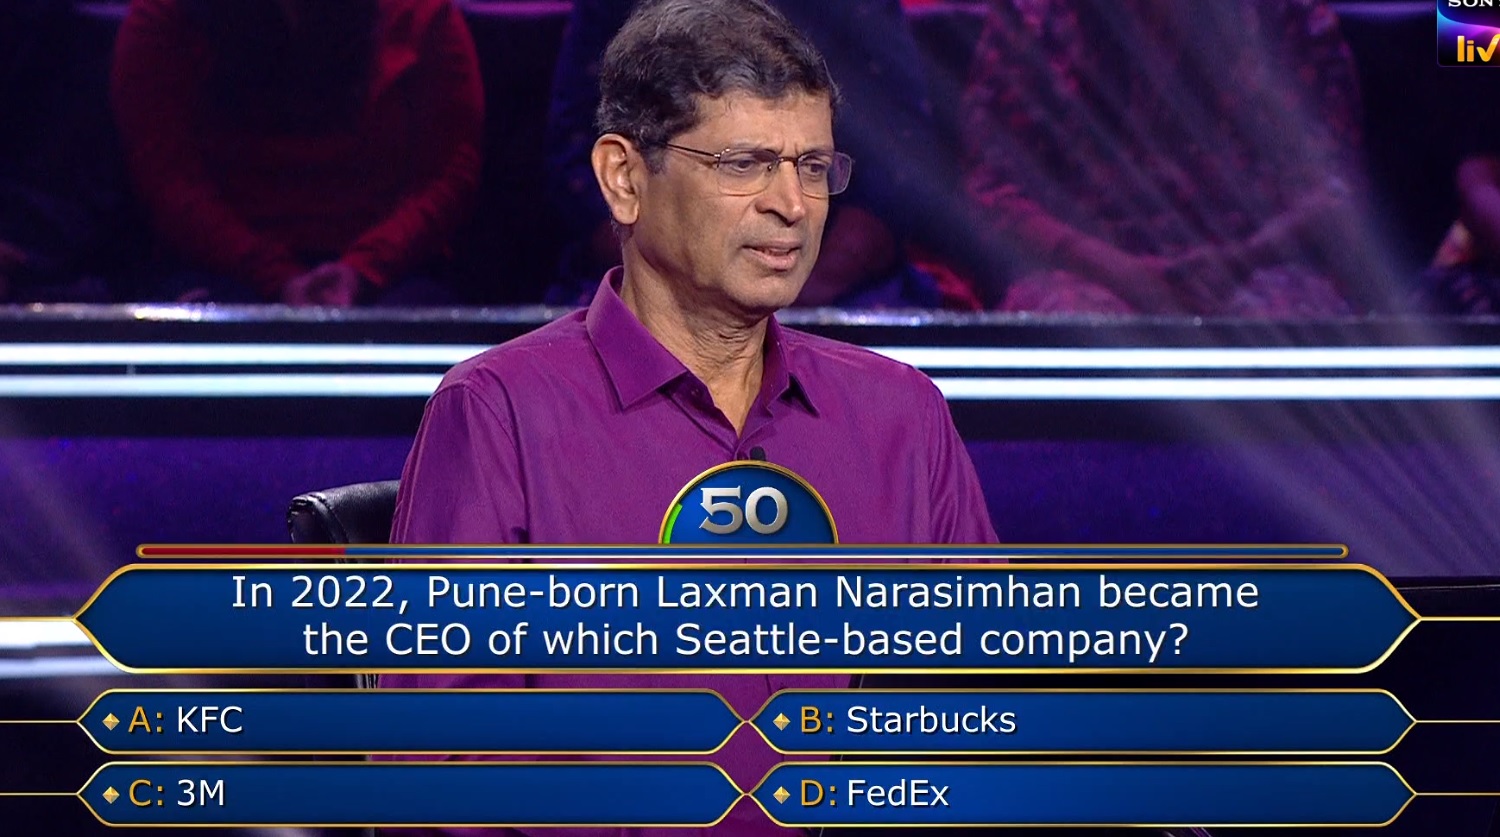 Ques : In 2022, Pune-born Laxman Narasimhan became the CEO of which Seattle-based company?